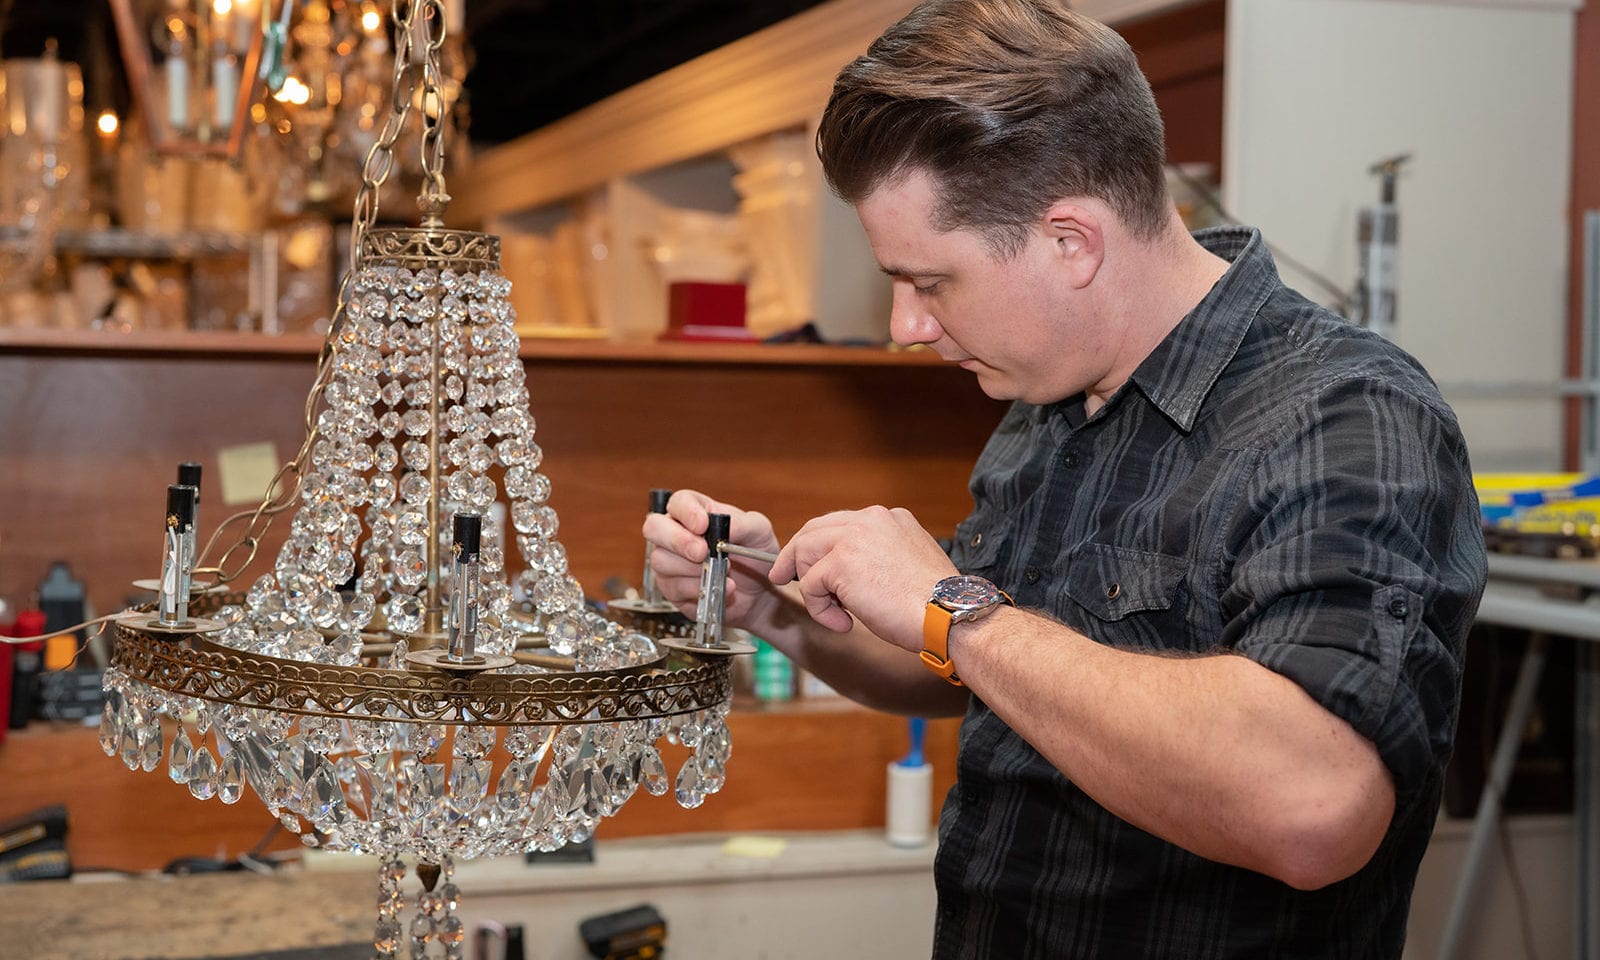 The Lamp Shoppe specializes in custom lamps and lampshades.Specializing in studio lighting restoration, including European conversions, we build custom lamps and lamp bases in various styles, shapes, and finishes to suit the most discriminating taste.